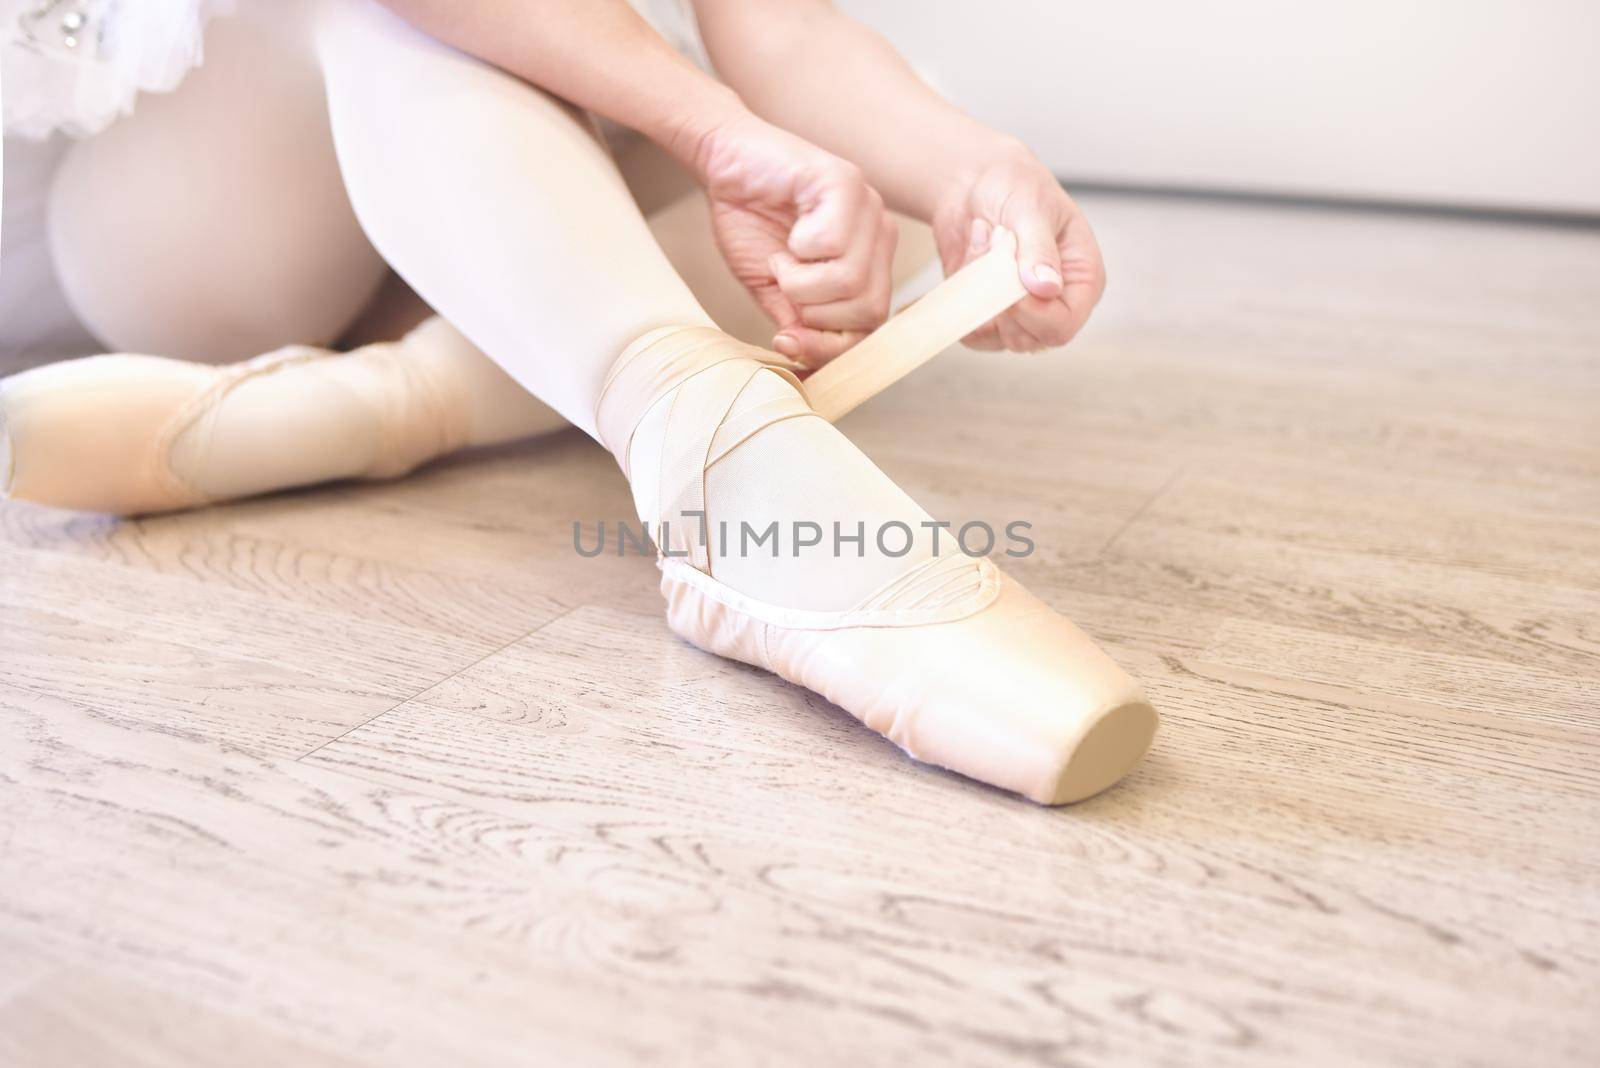 A ballerina sitting on the floor tying her ballet shoes. close view